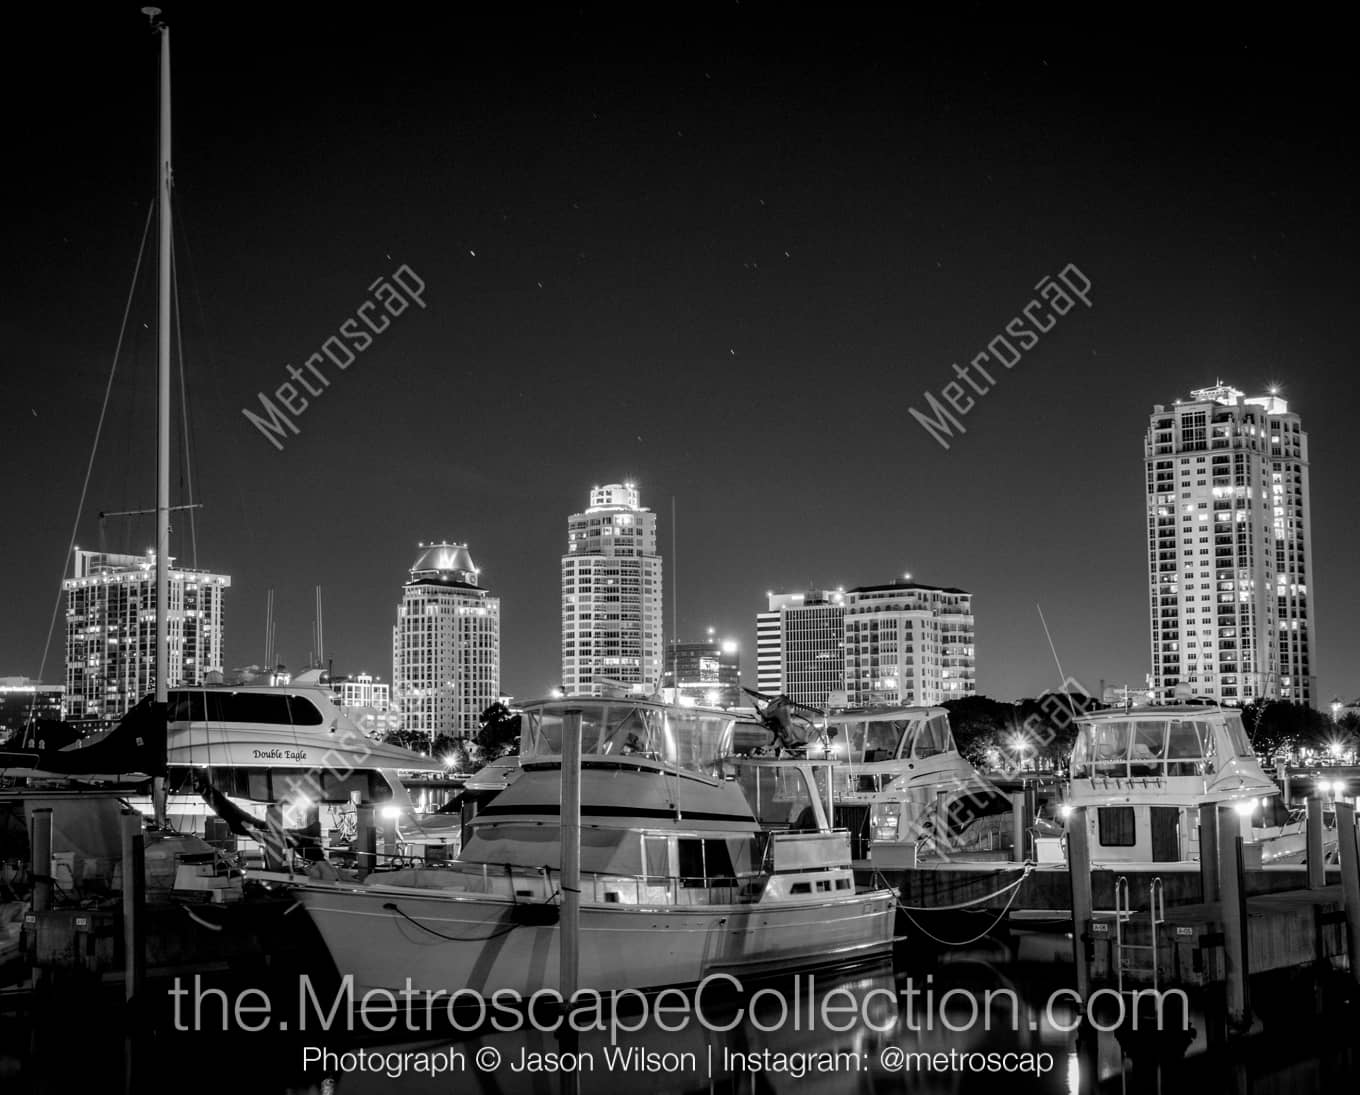 St Petersburg Florida Picture at Night